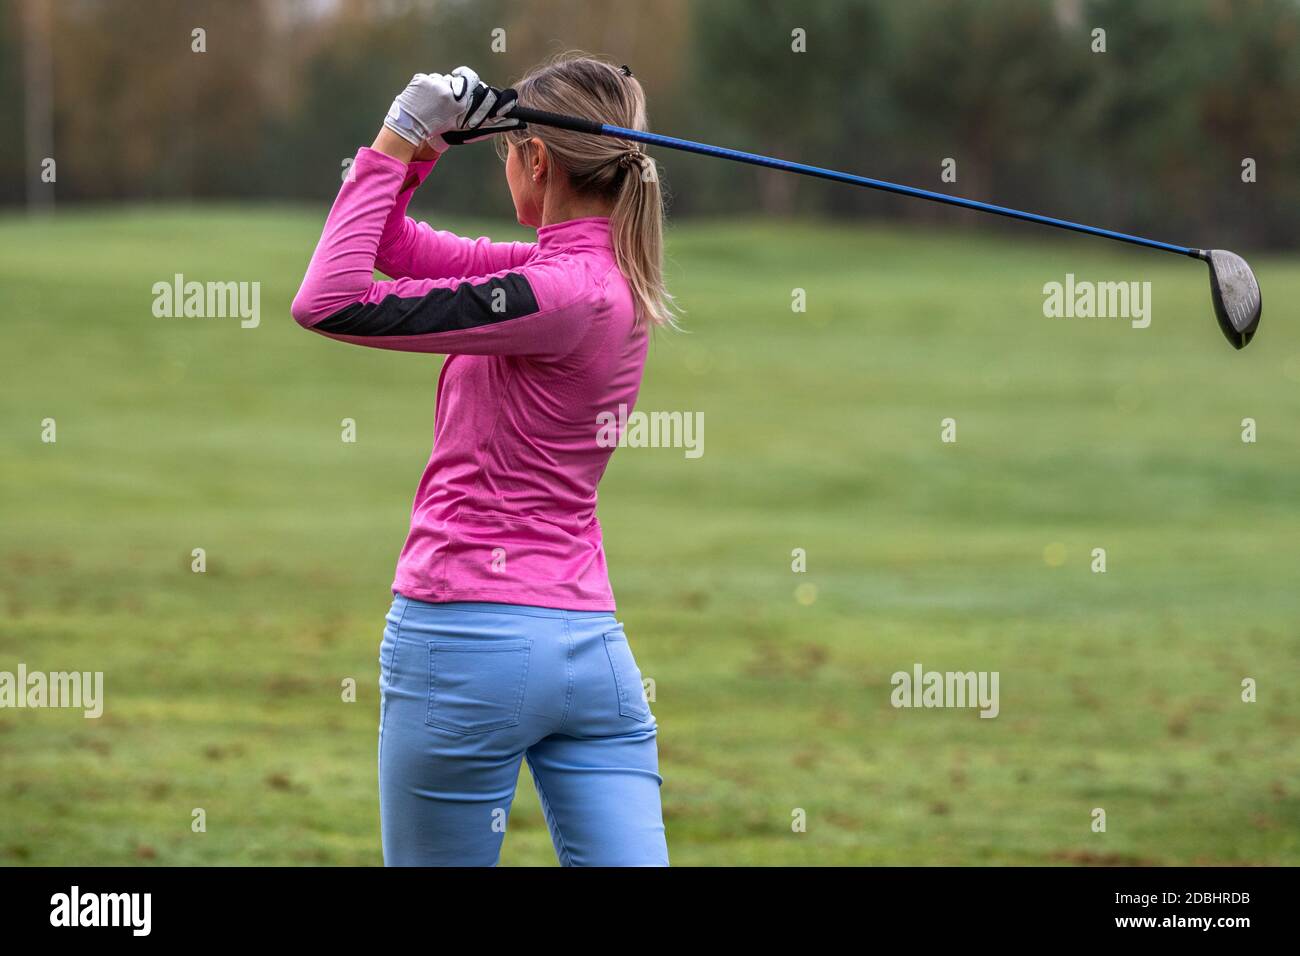 Girl practicing playing golf on the golf course Stock Photo